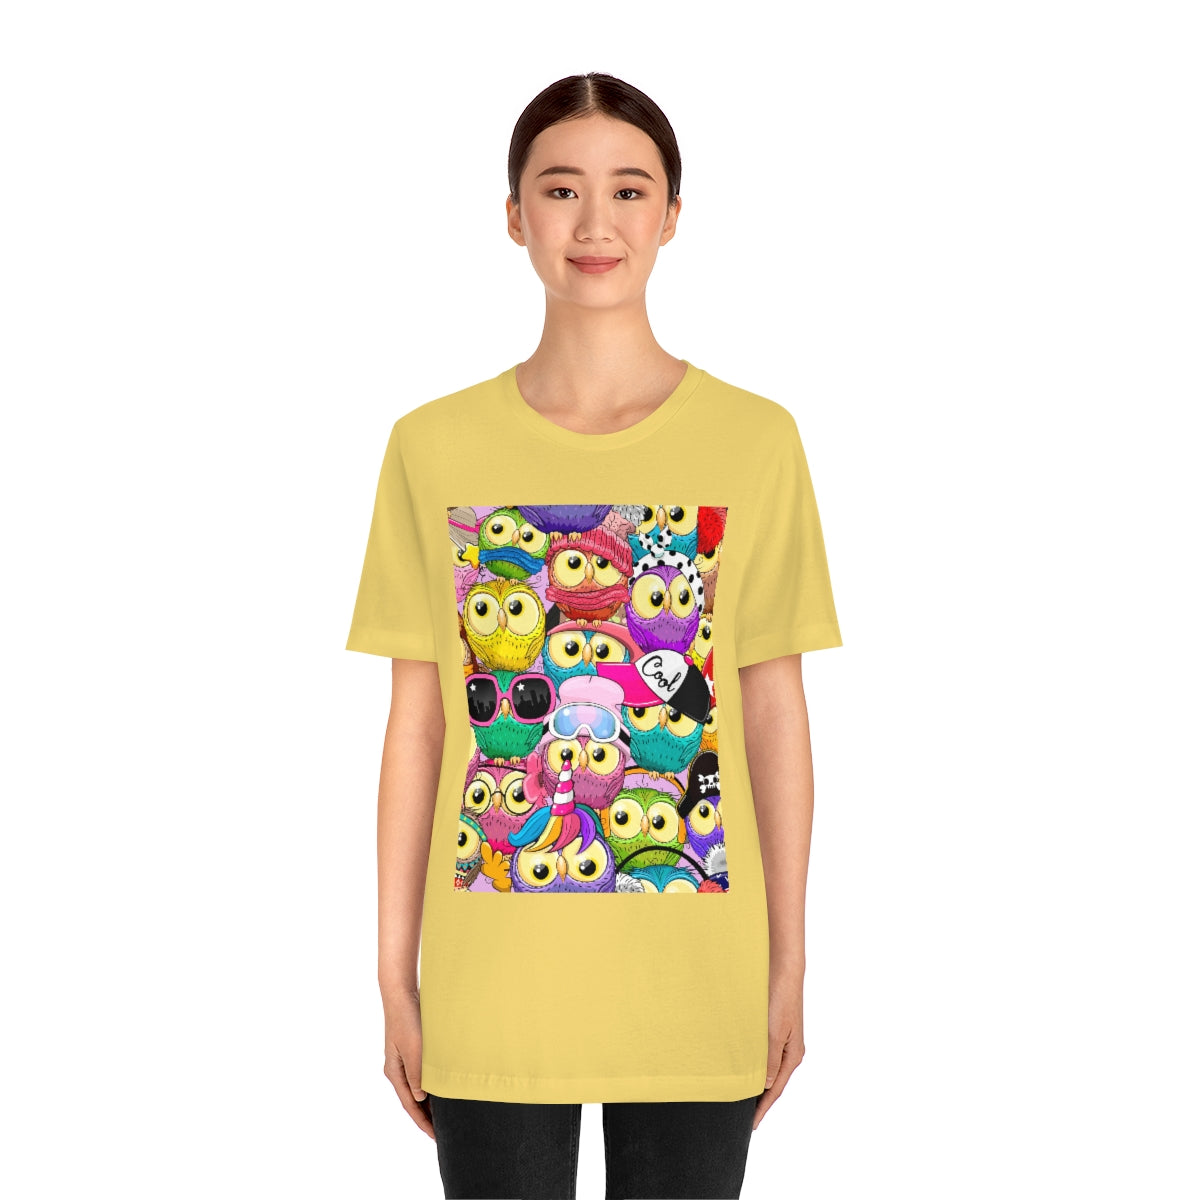 Unisex Jersey Short Sleeve Tee "Colorful Pattern with cute cartoon owls"